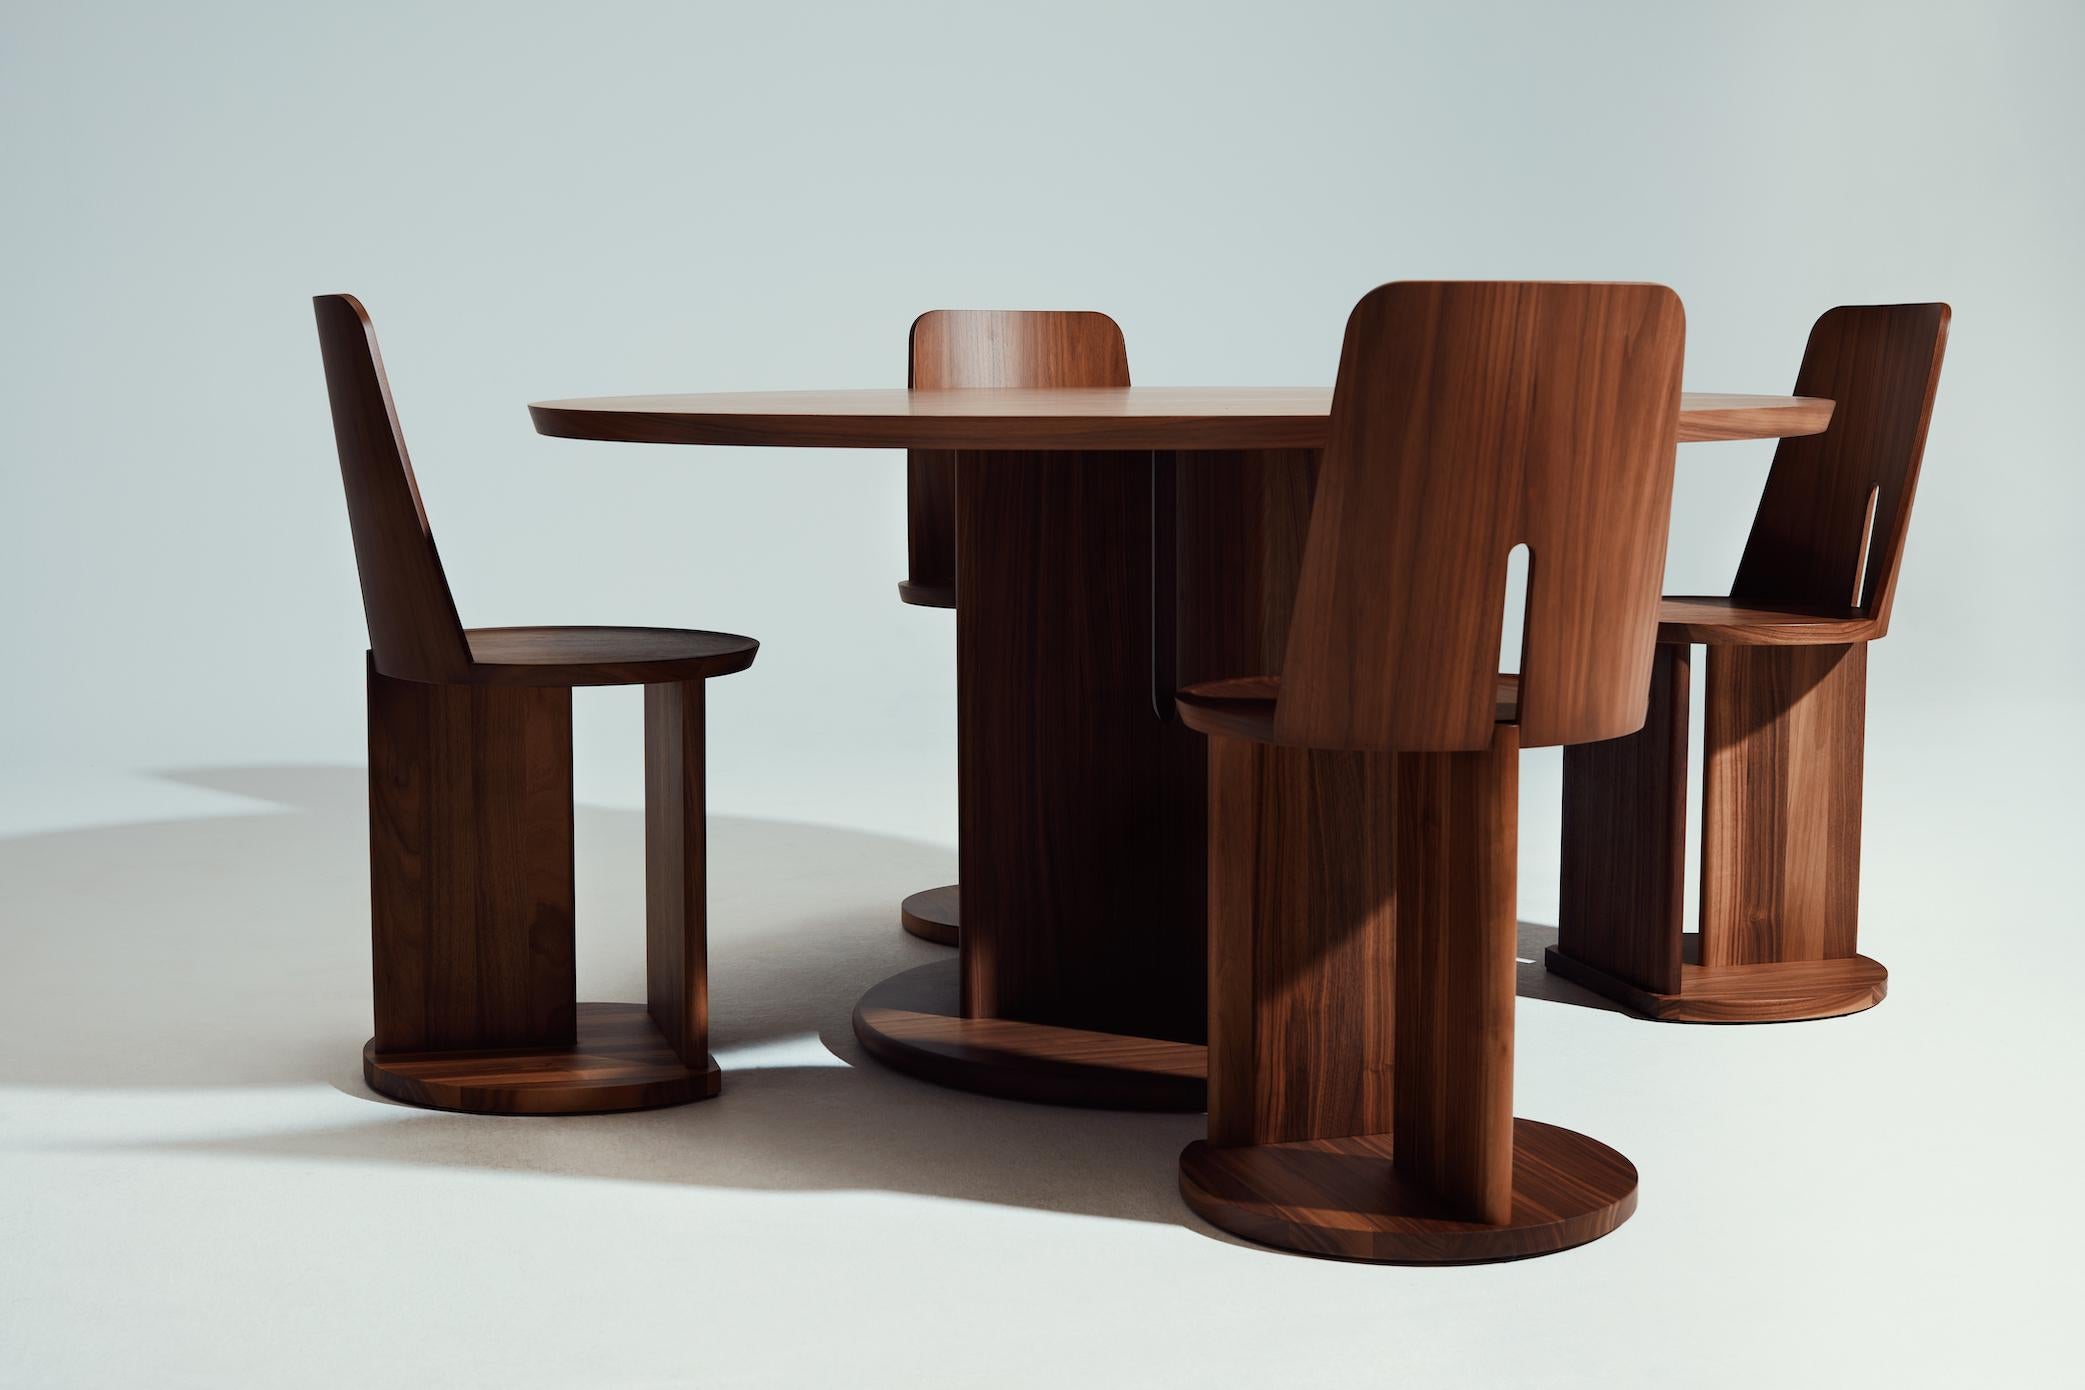 La Manufacture-Paris Intersection Canaletto Walnut Chair Designed by Neri & Hu For Sale 1